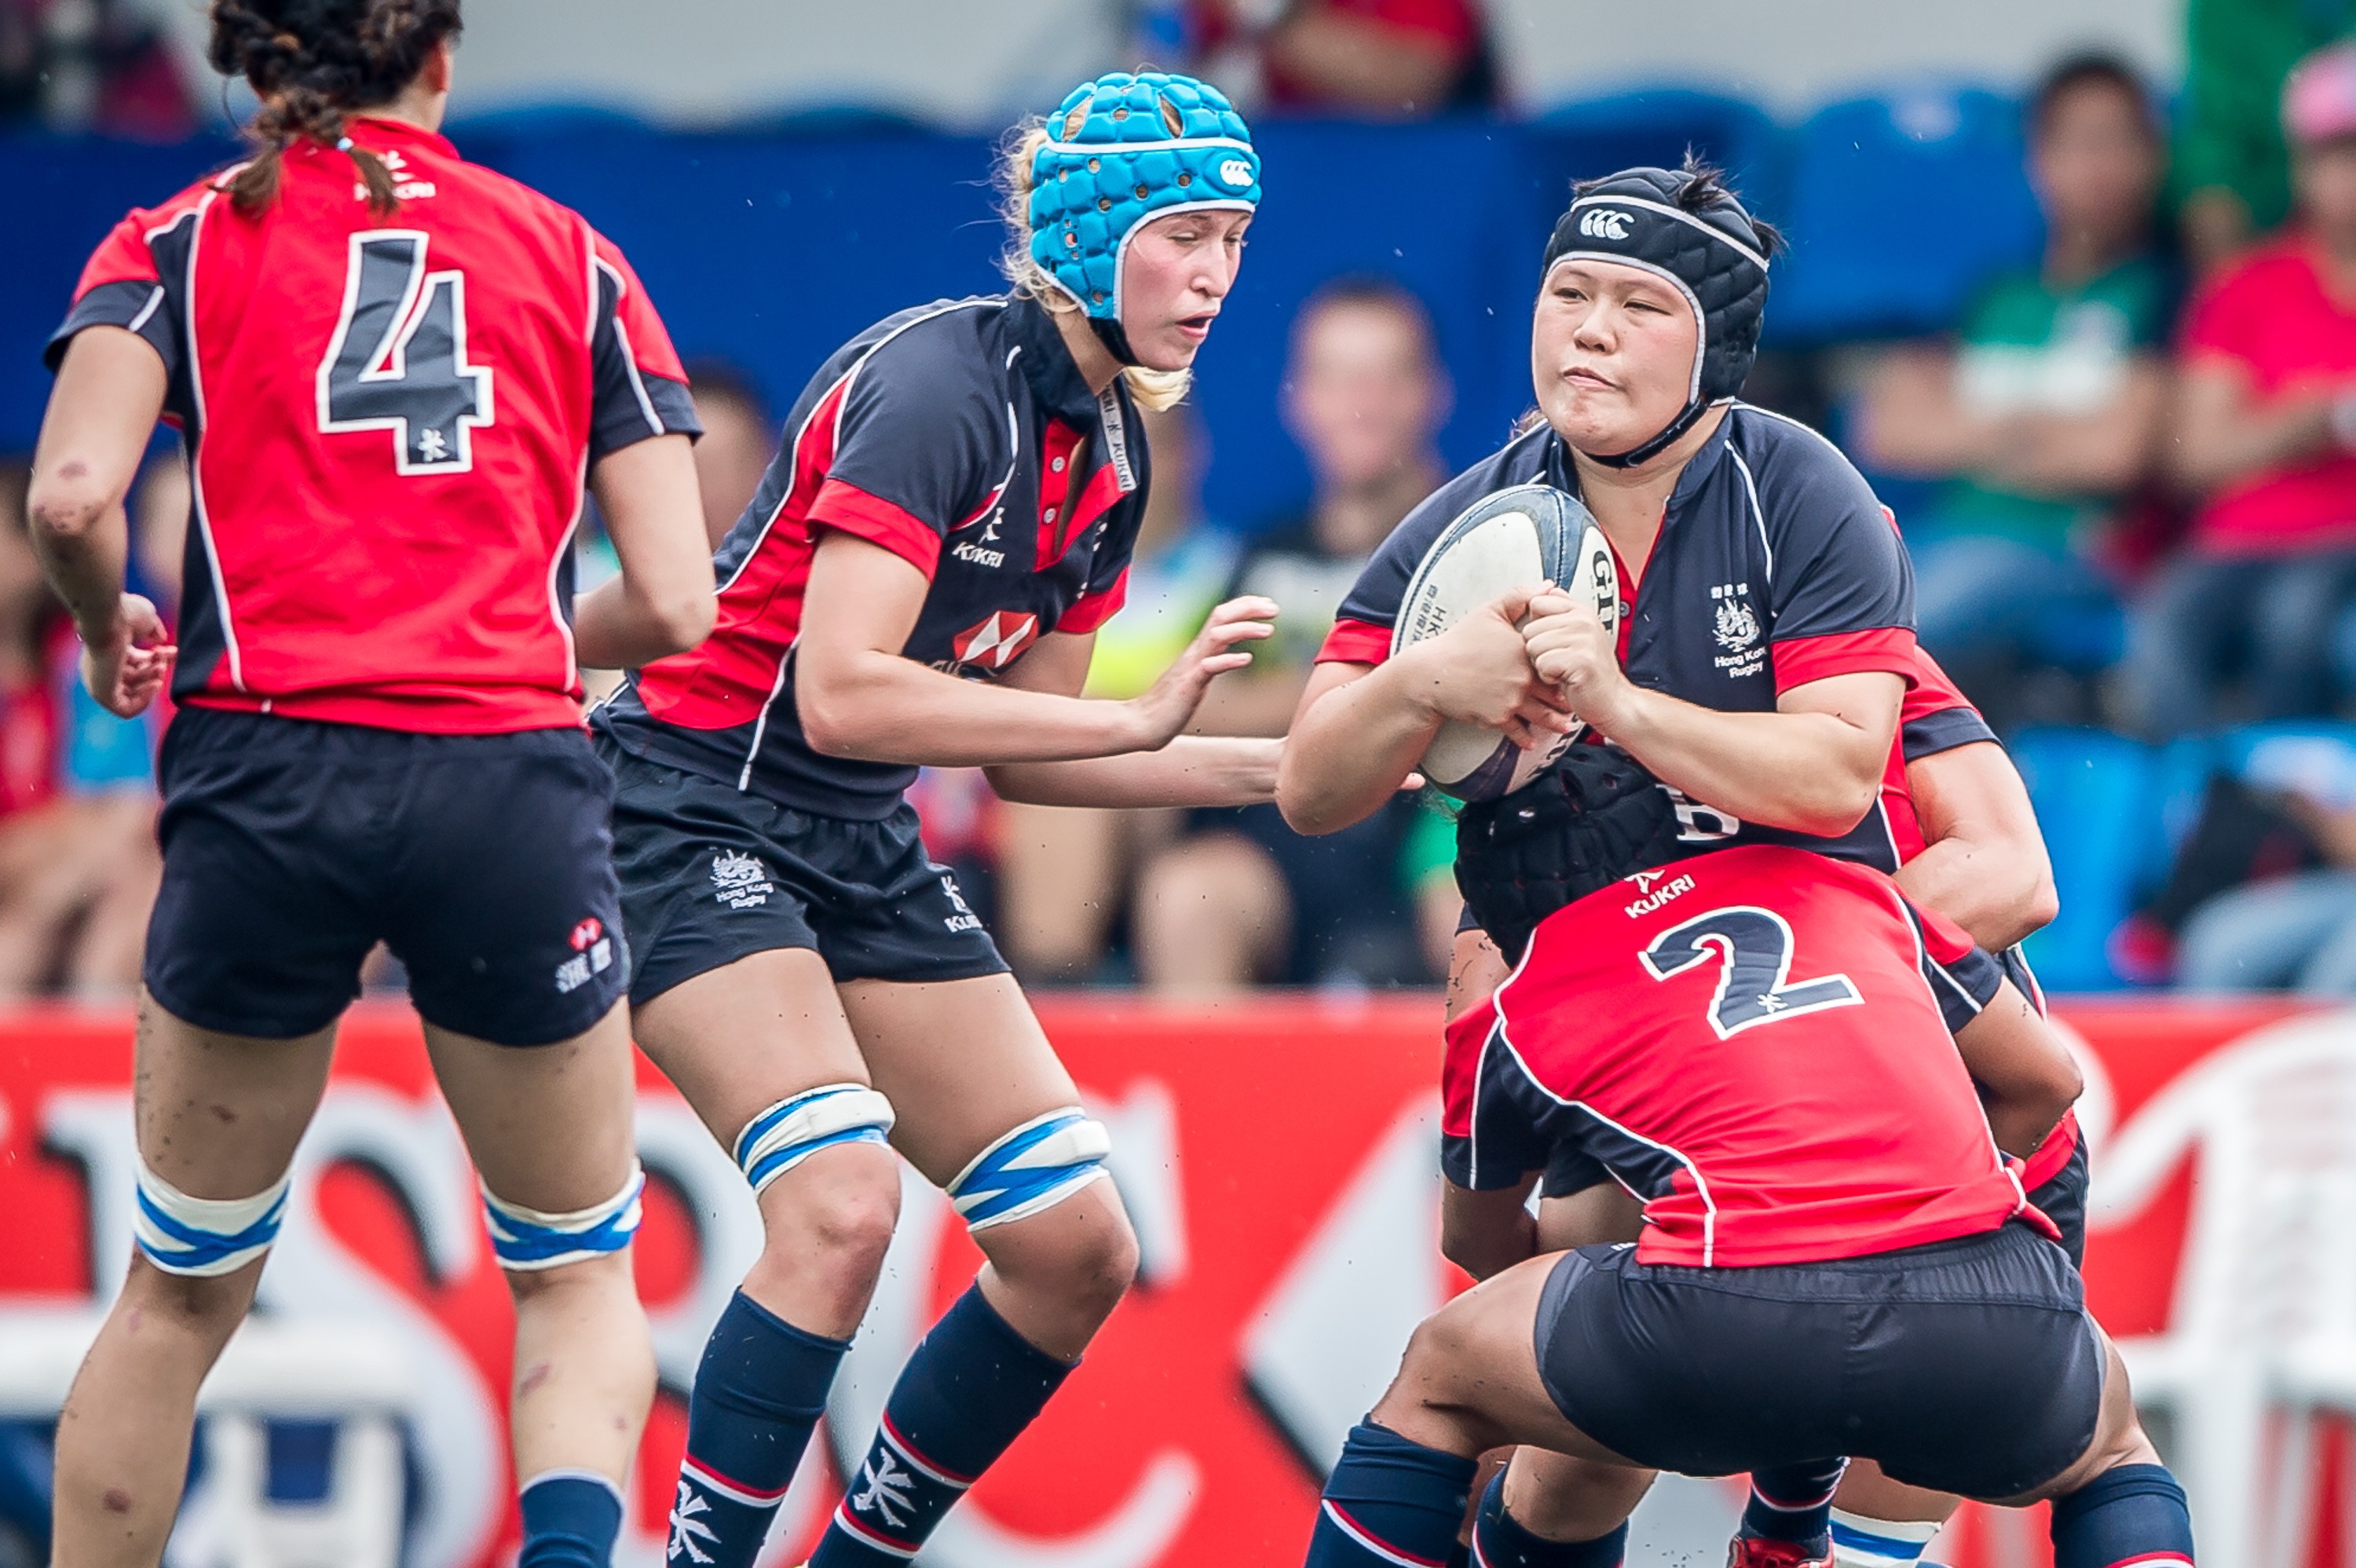 Hong Kong's Lee Ka-shun is as passionate about helping special-needs children as she is about rugby. Photo: HKRU